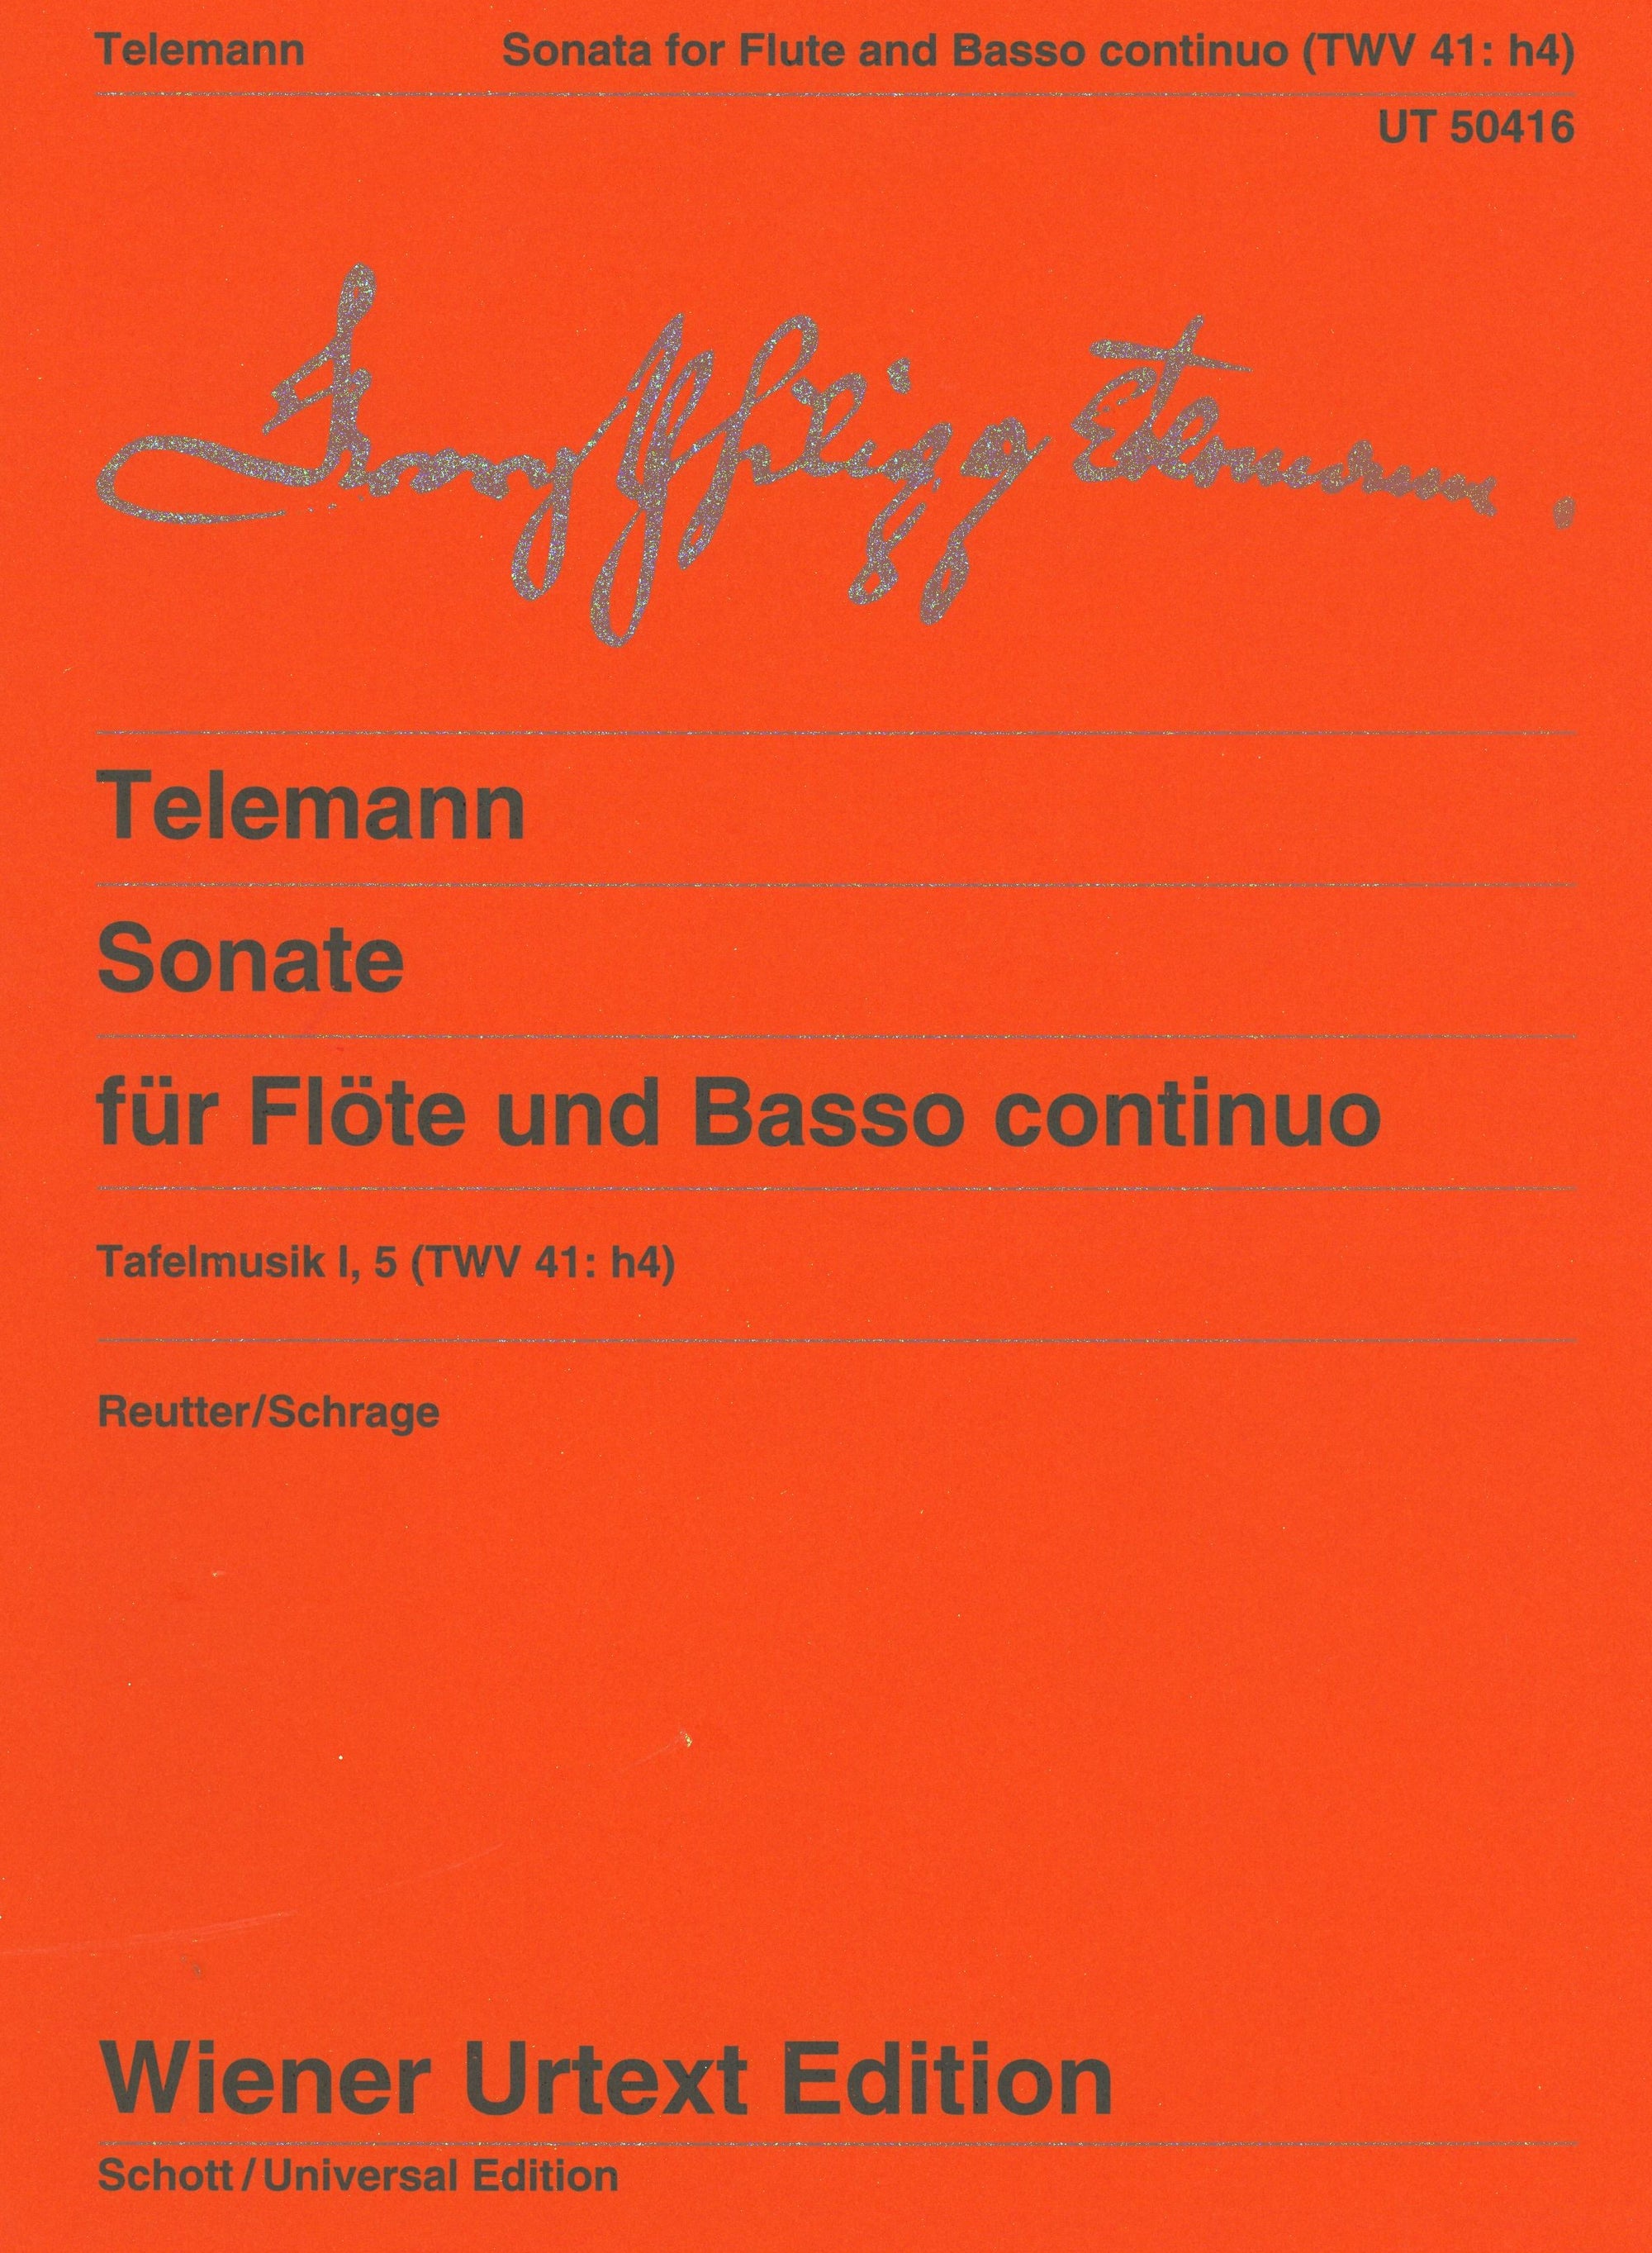 Telemann: Sonata for Flute and Basso continuo, TWV 41:h4